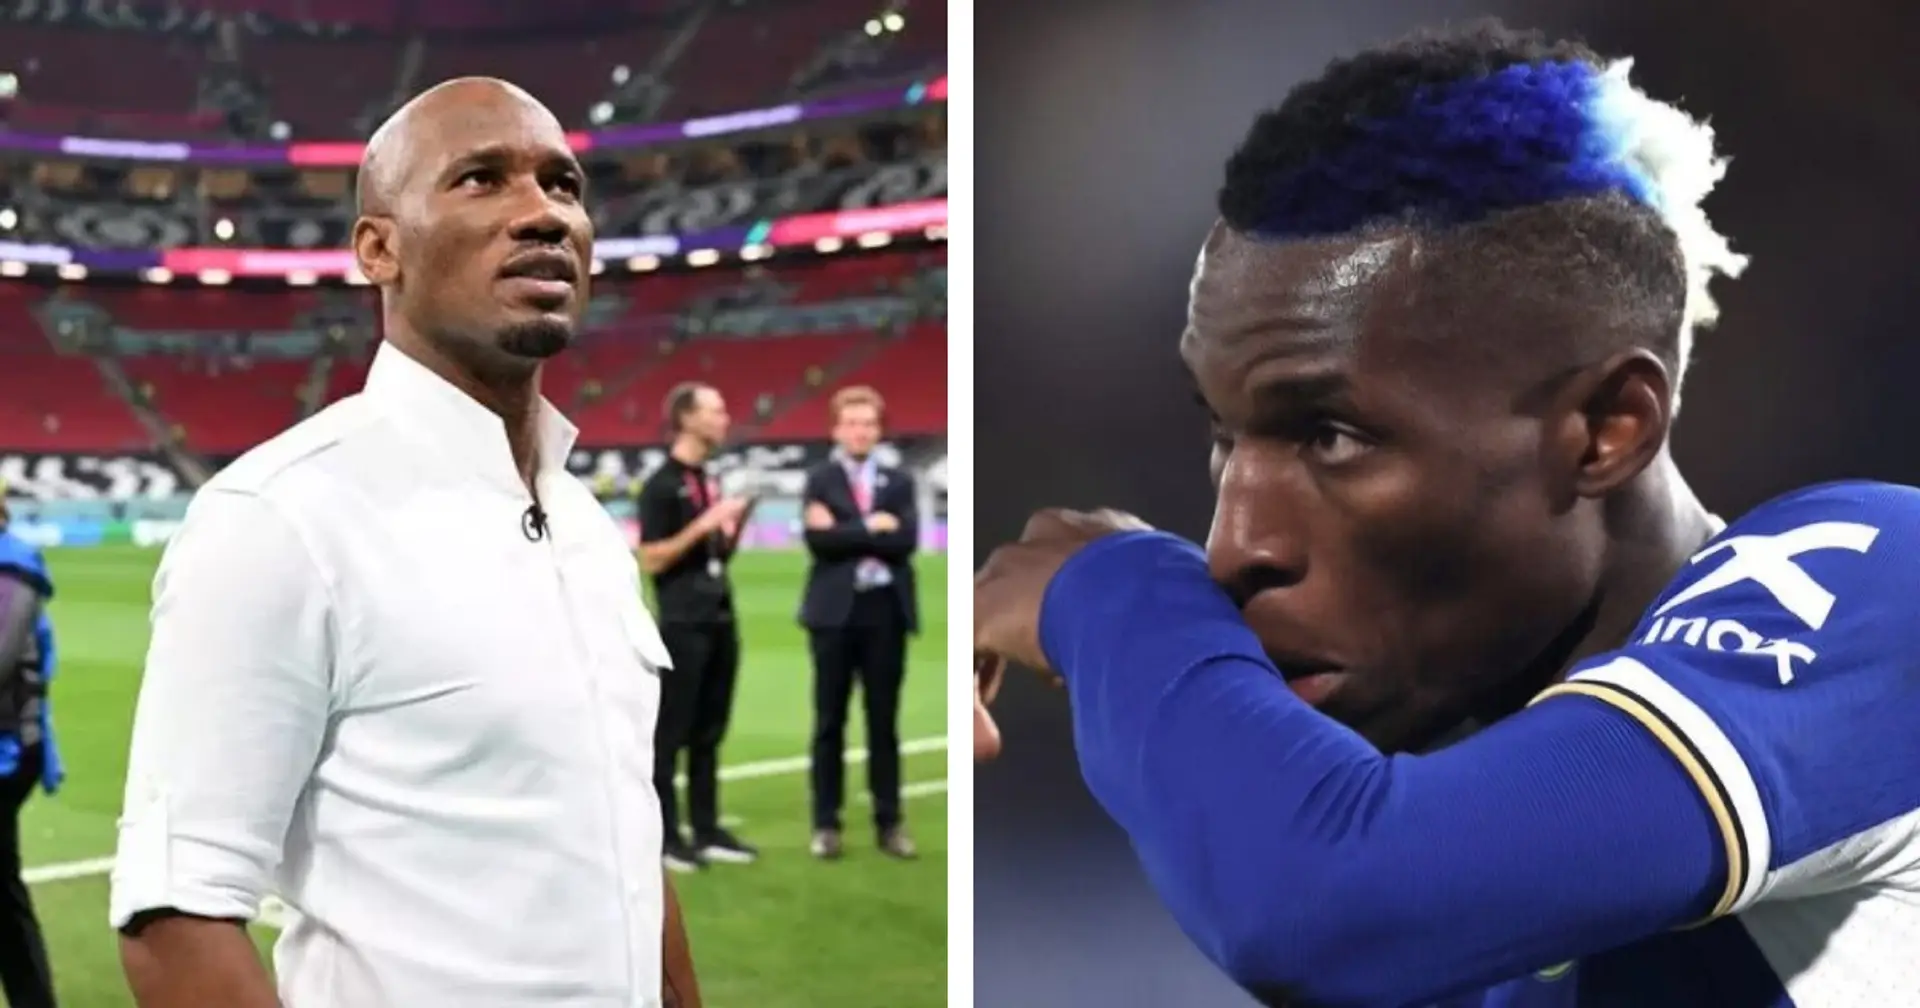 'Keep your head high up': Drogba sends Jackson message after Man City clash